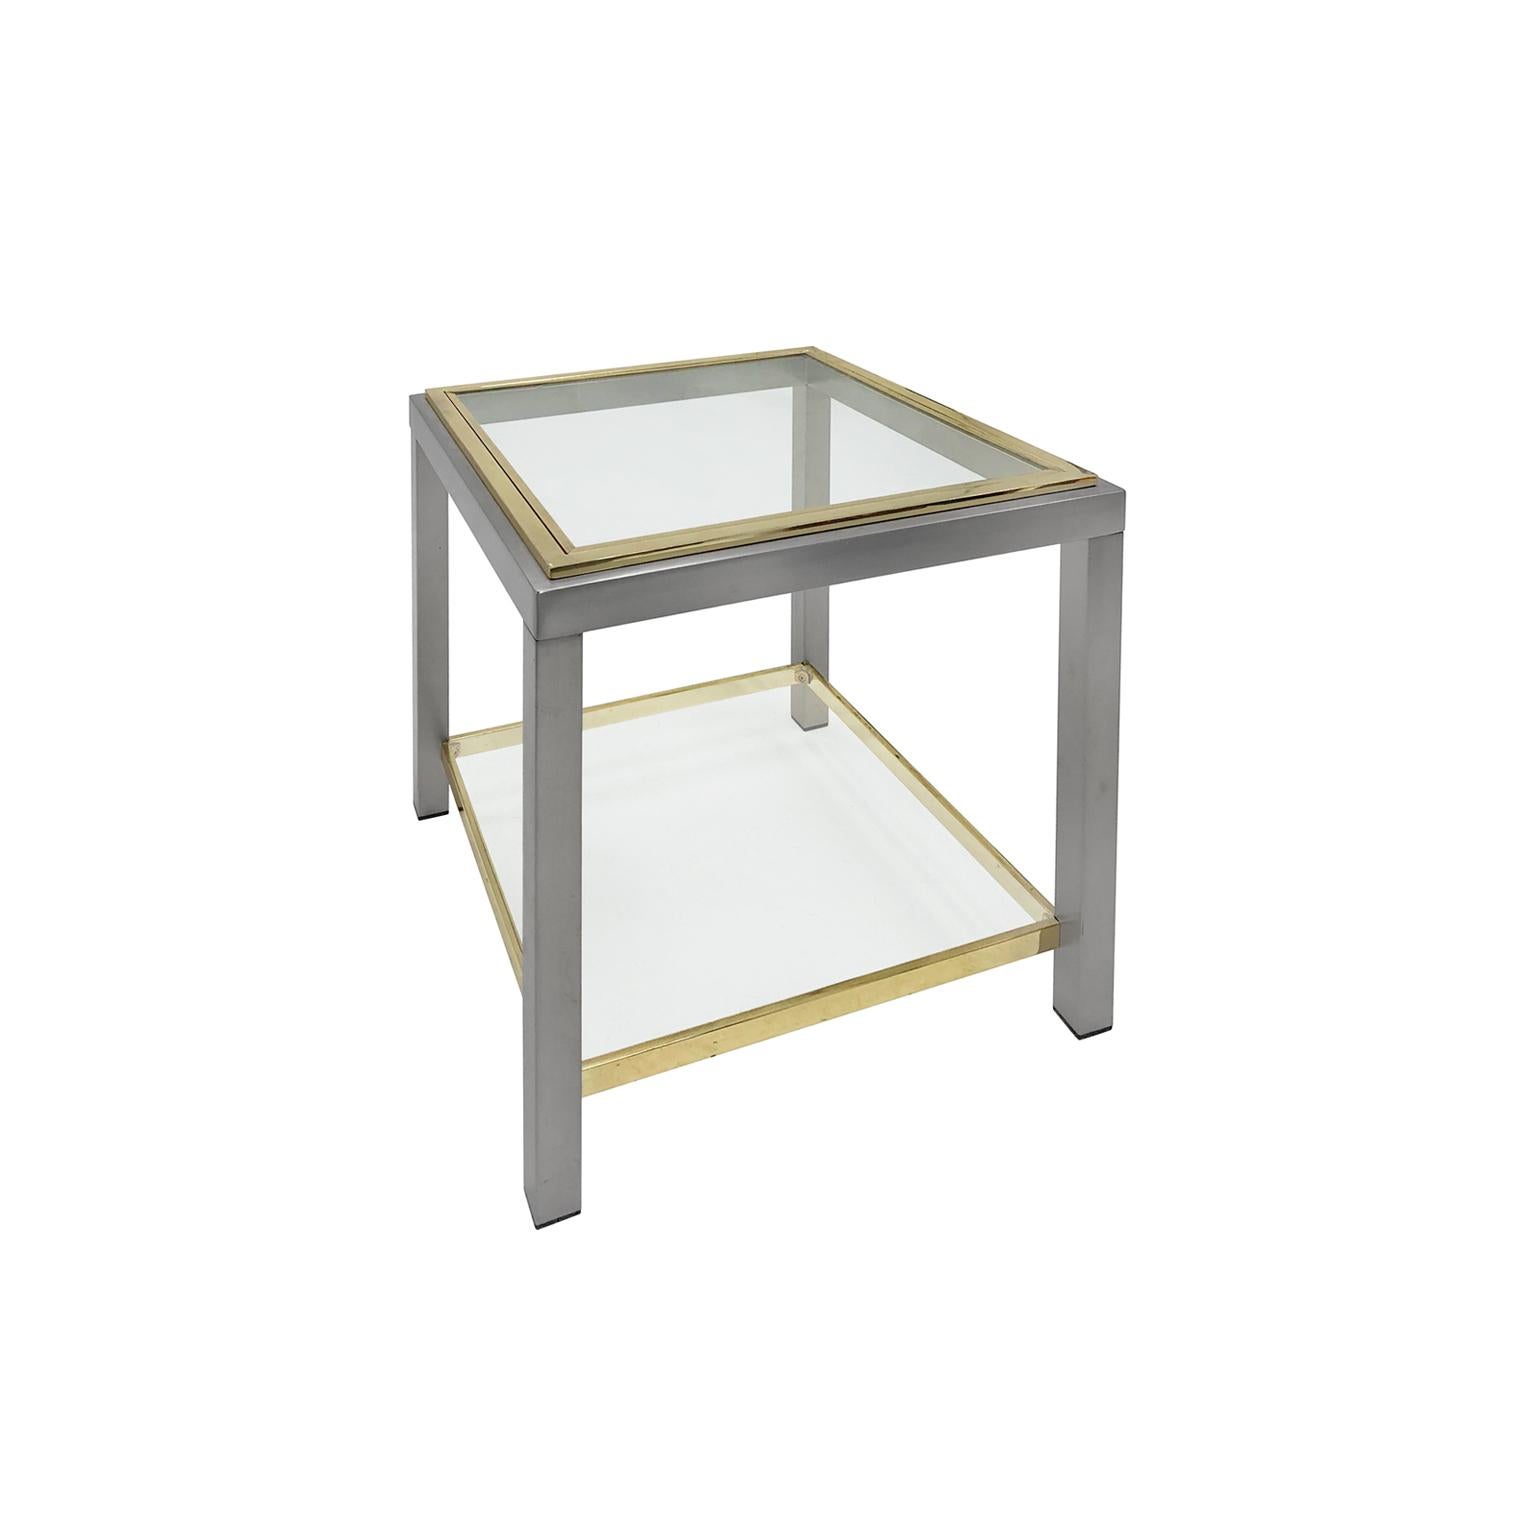 Brass and chrome two-tiered side table by Romeo Rega. France, 1970s. 

Pair available, priced individually.